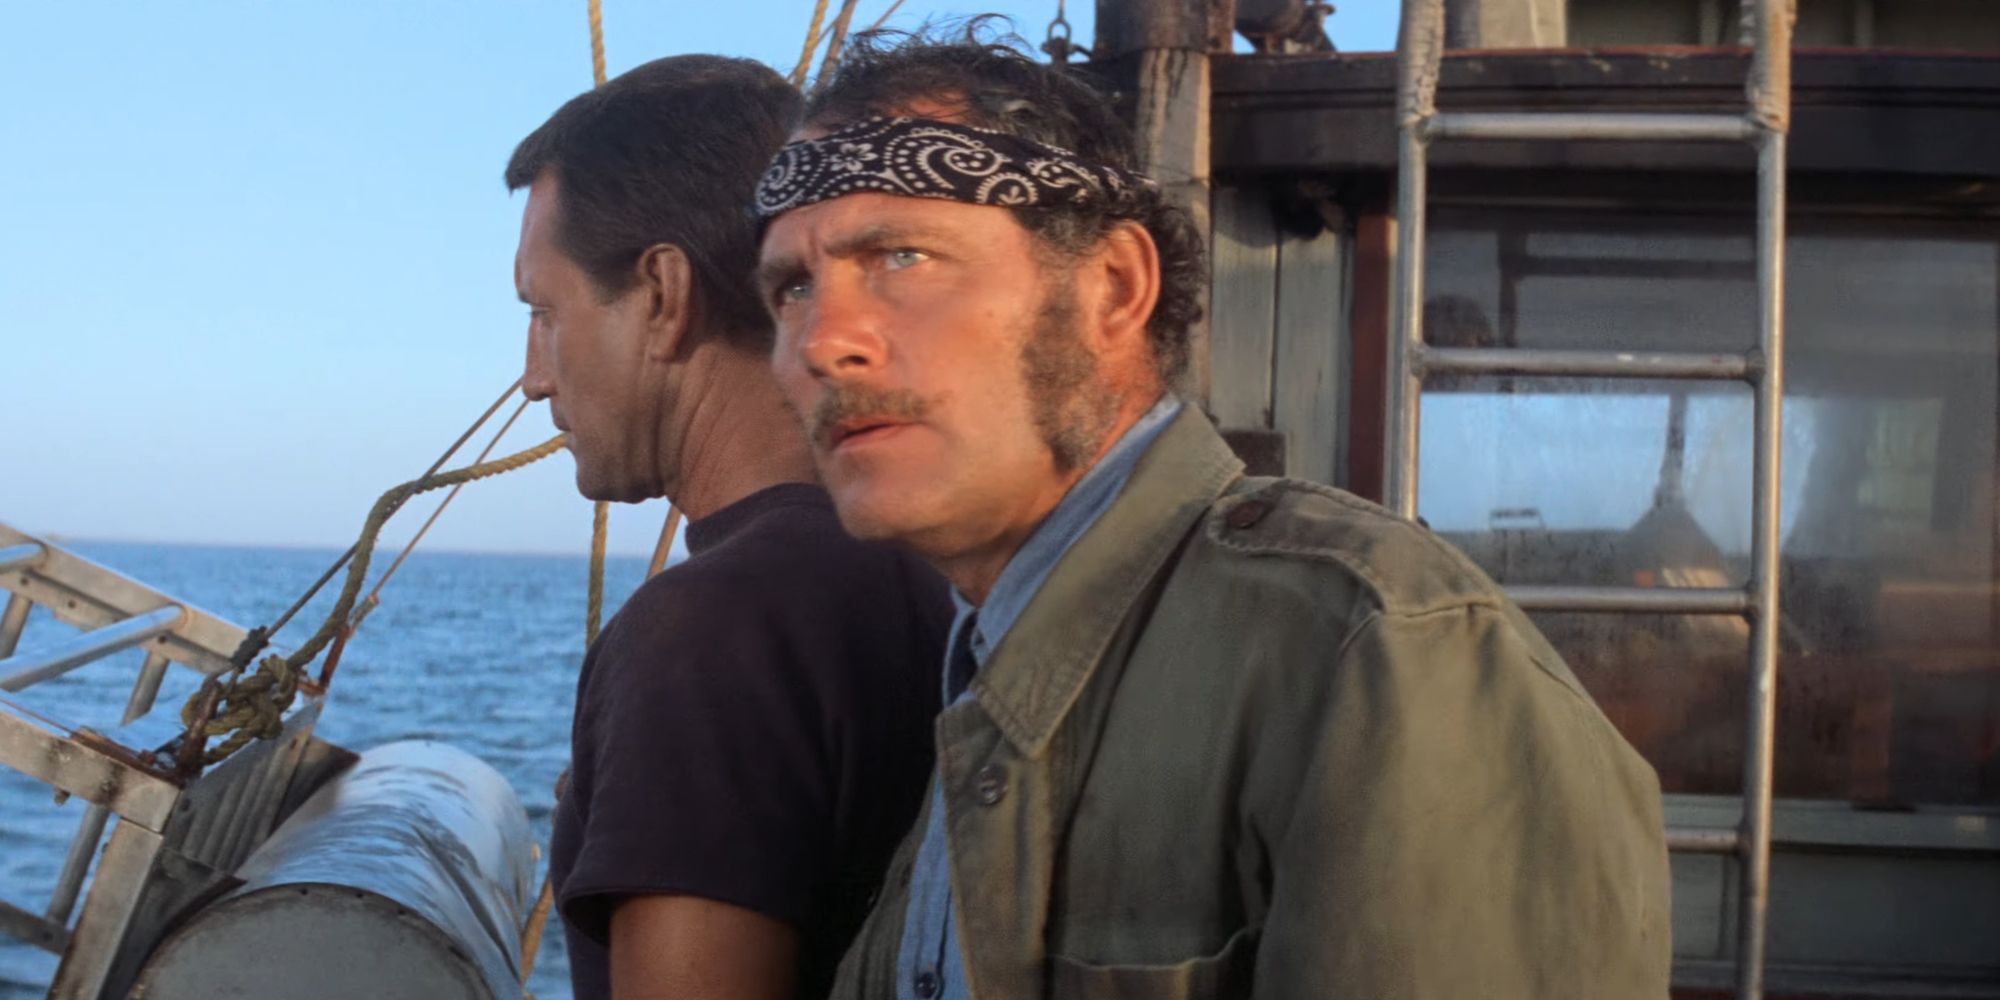 Martin Brody and Quint aboard the Orca in Jaws